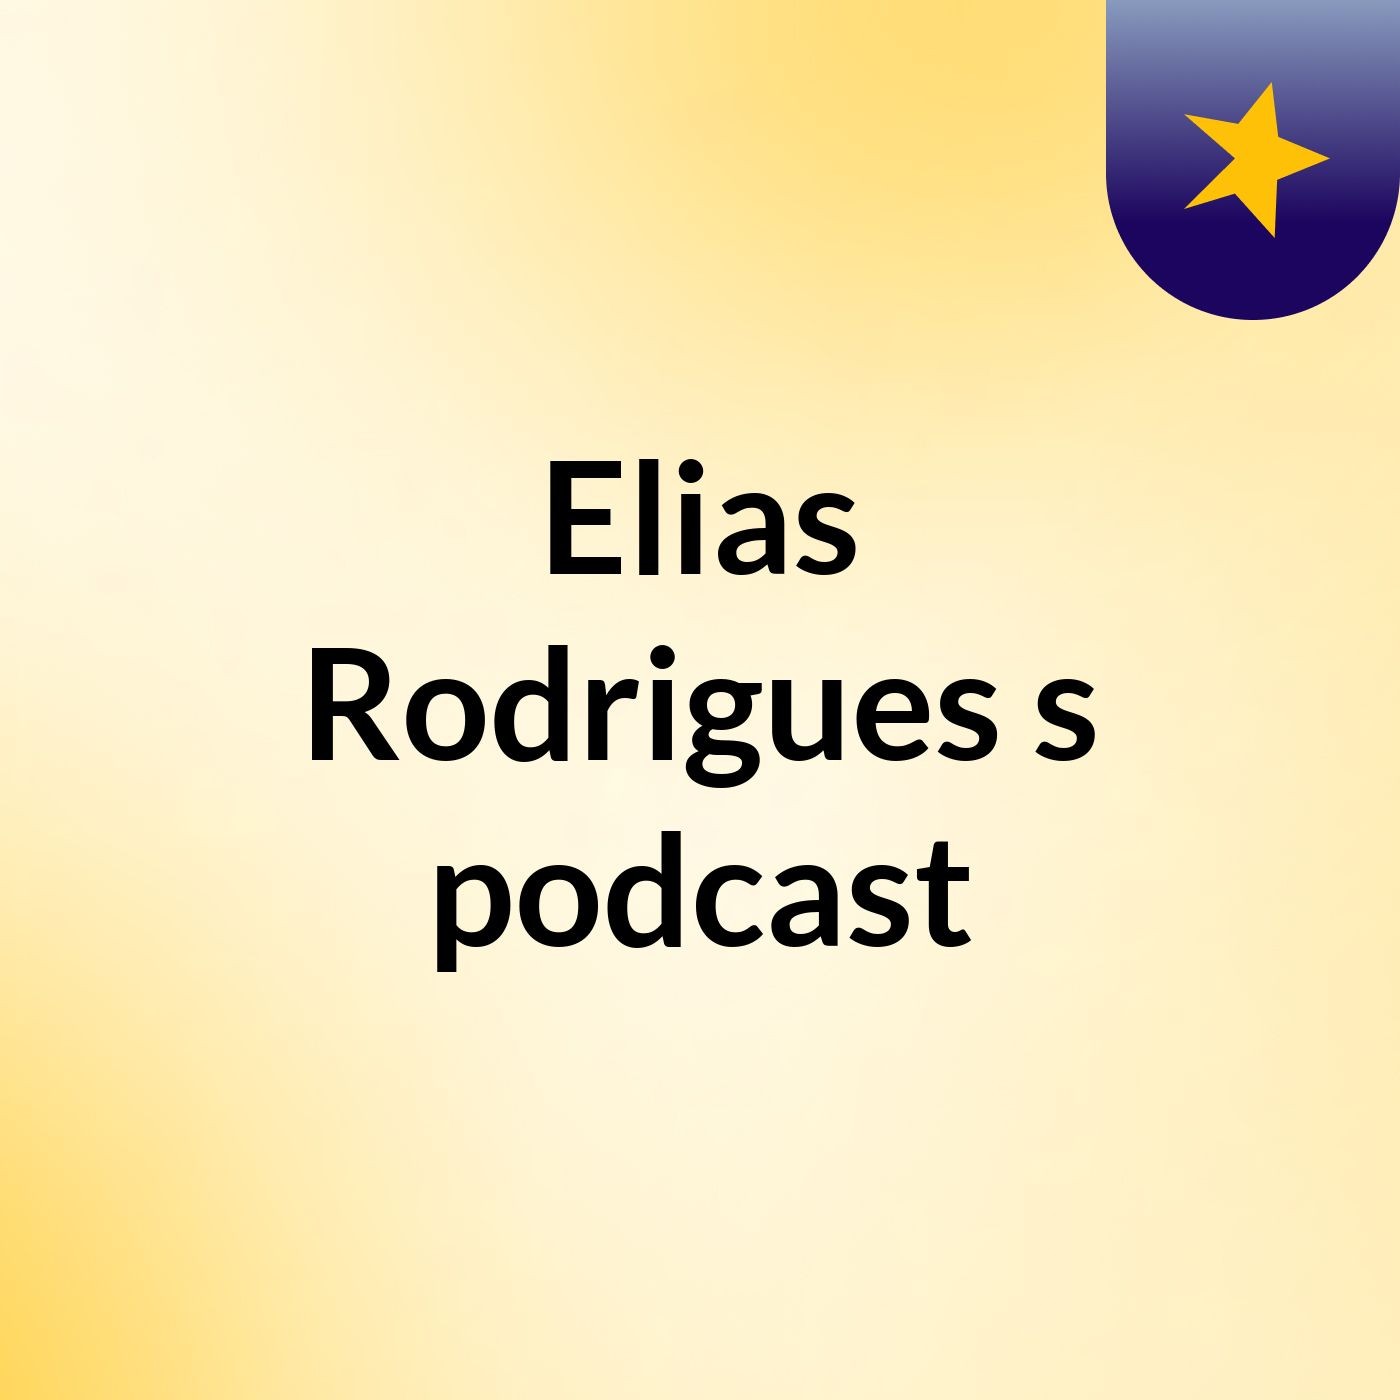 Elias Rodrigues's podcast